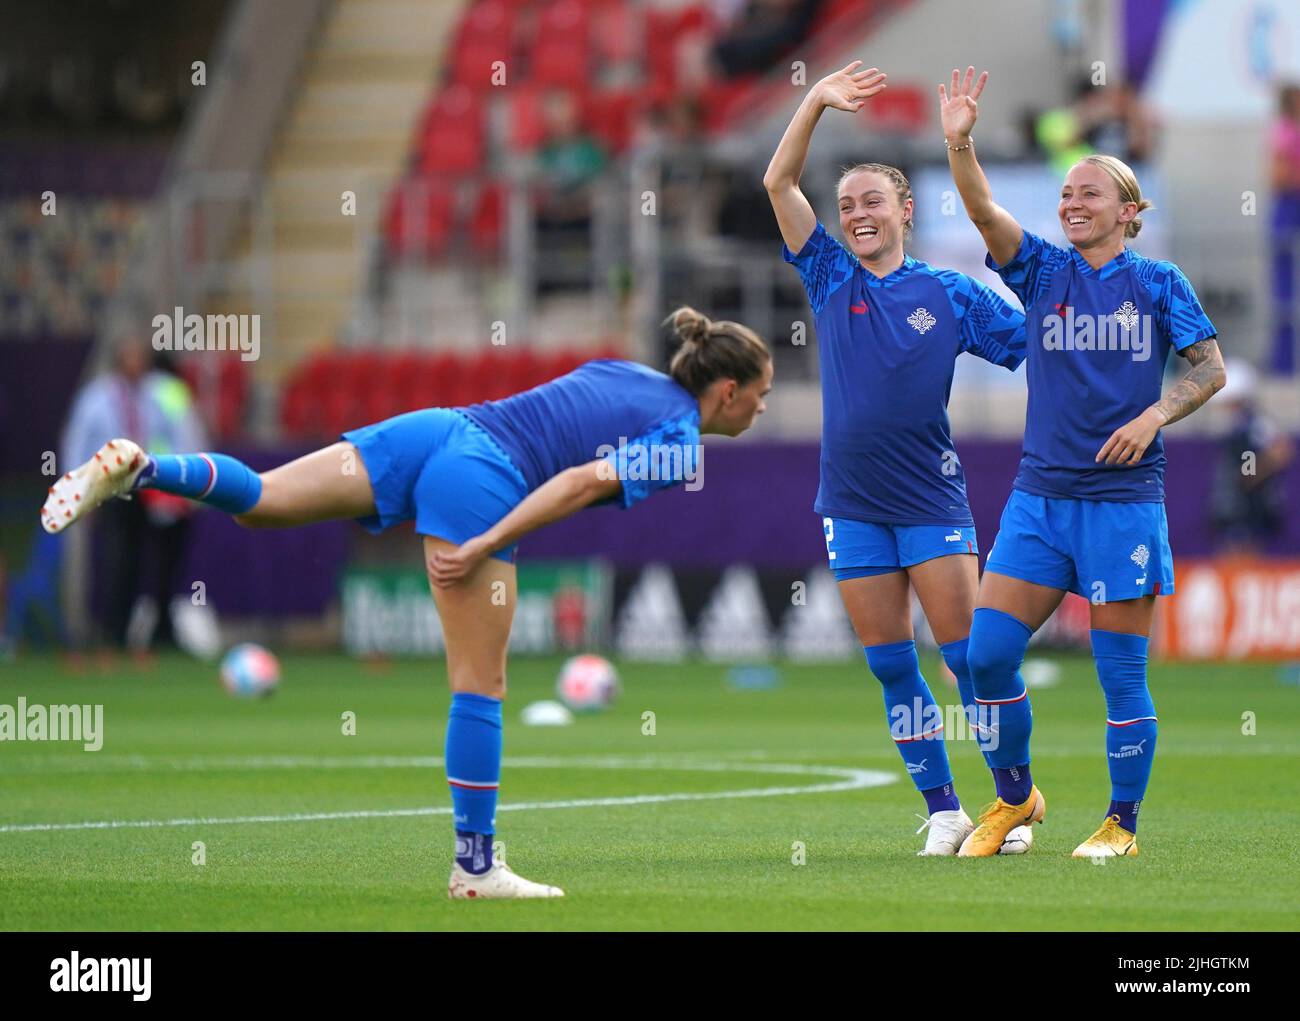 Iceland's Sif Atladottir and Gunnhildur Jonsdottir wave to the stands during the UEFA Women's Euro 2022 Group D match at the New York Stadium, Rotherham. Picture date: Monday July 18, 2022. Stock Photo